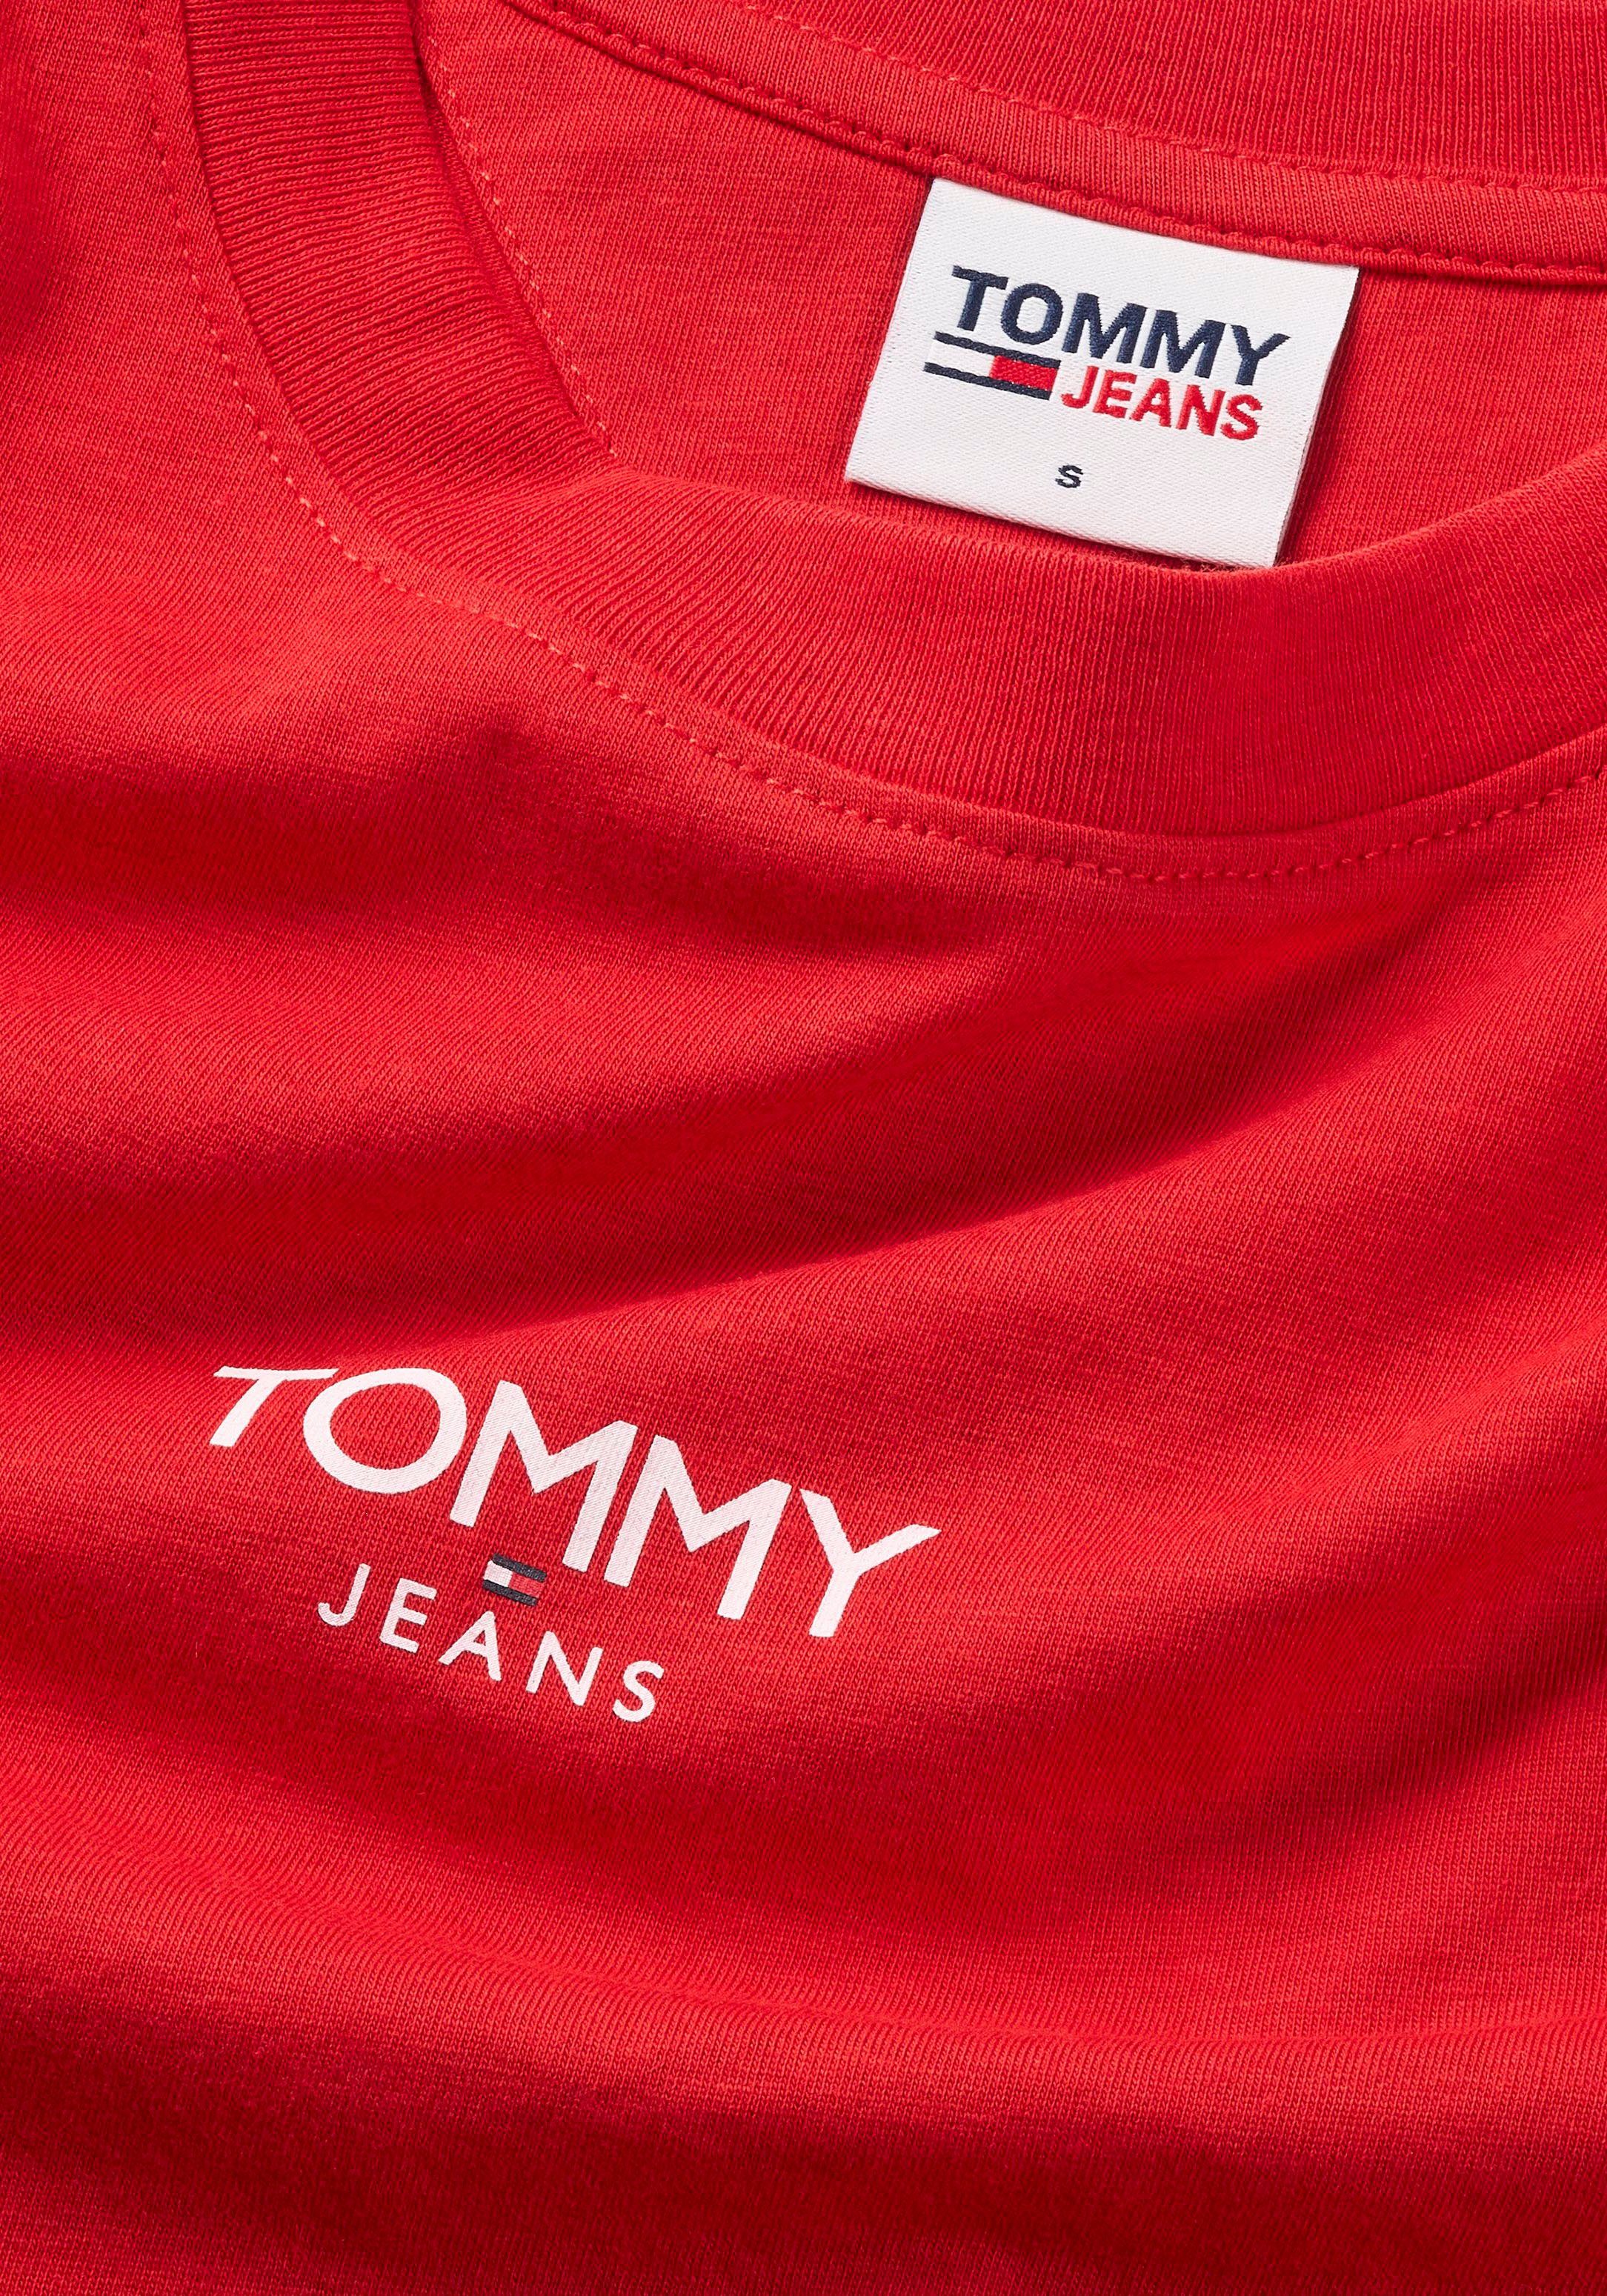 BBY ESSENTIAL TJW Tommy 1 LOGO mit Deep Logo Jeans T-Shirt Jeans Crimson SS Tommy